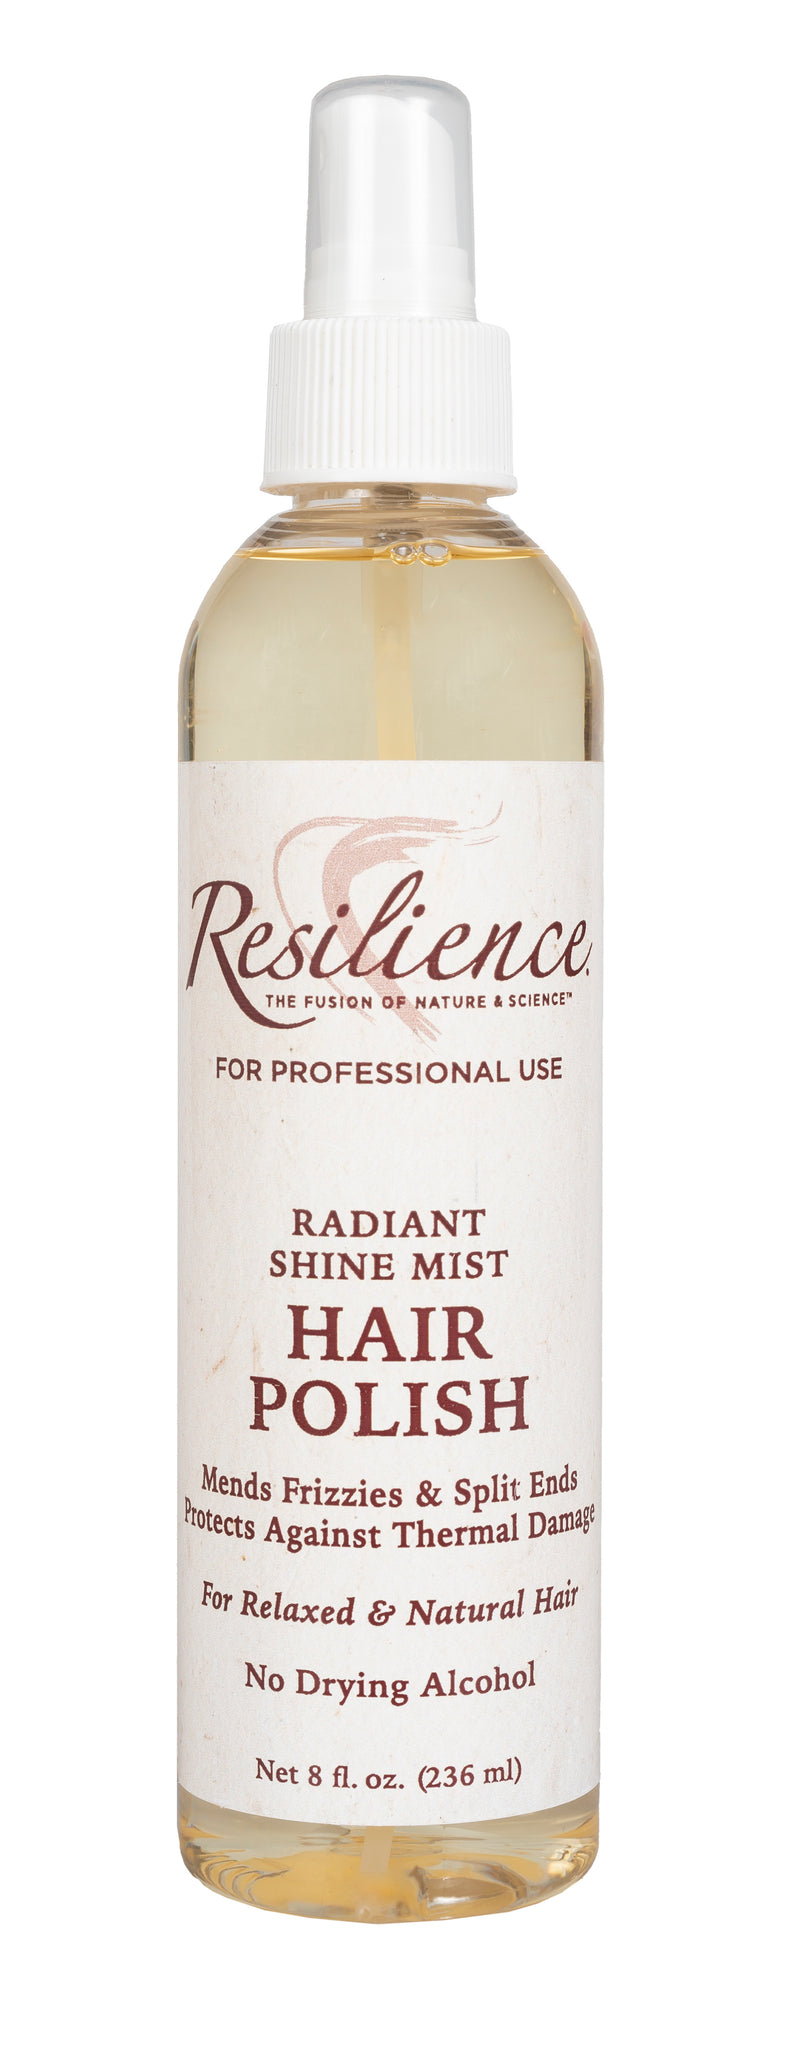 Resilience Hair Polish, Thermal Straightening Spray, Protects Hair Against Heat Damage From Blow Dryers, Flat Irons, Curling Irons & Other Hot Tools 8 oz.